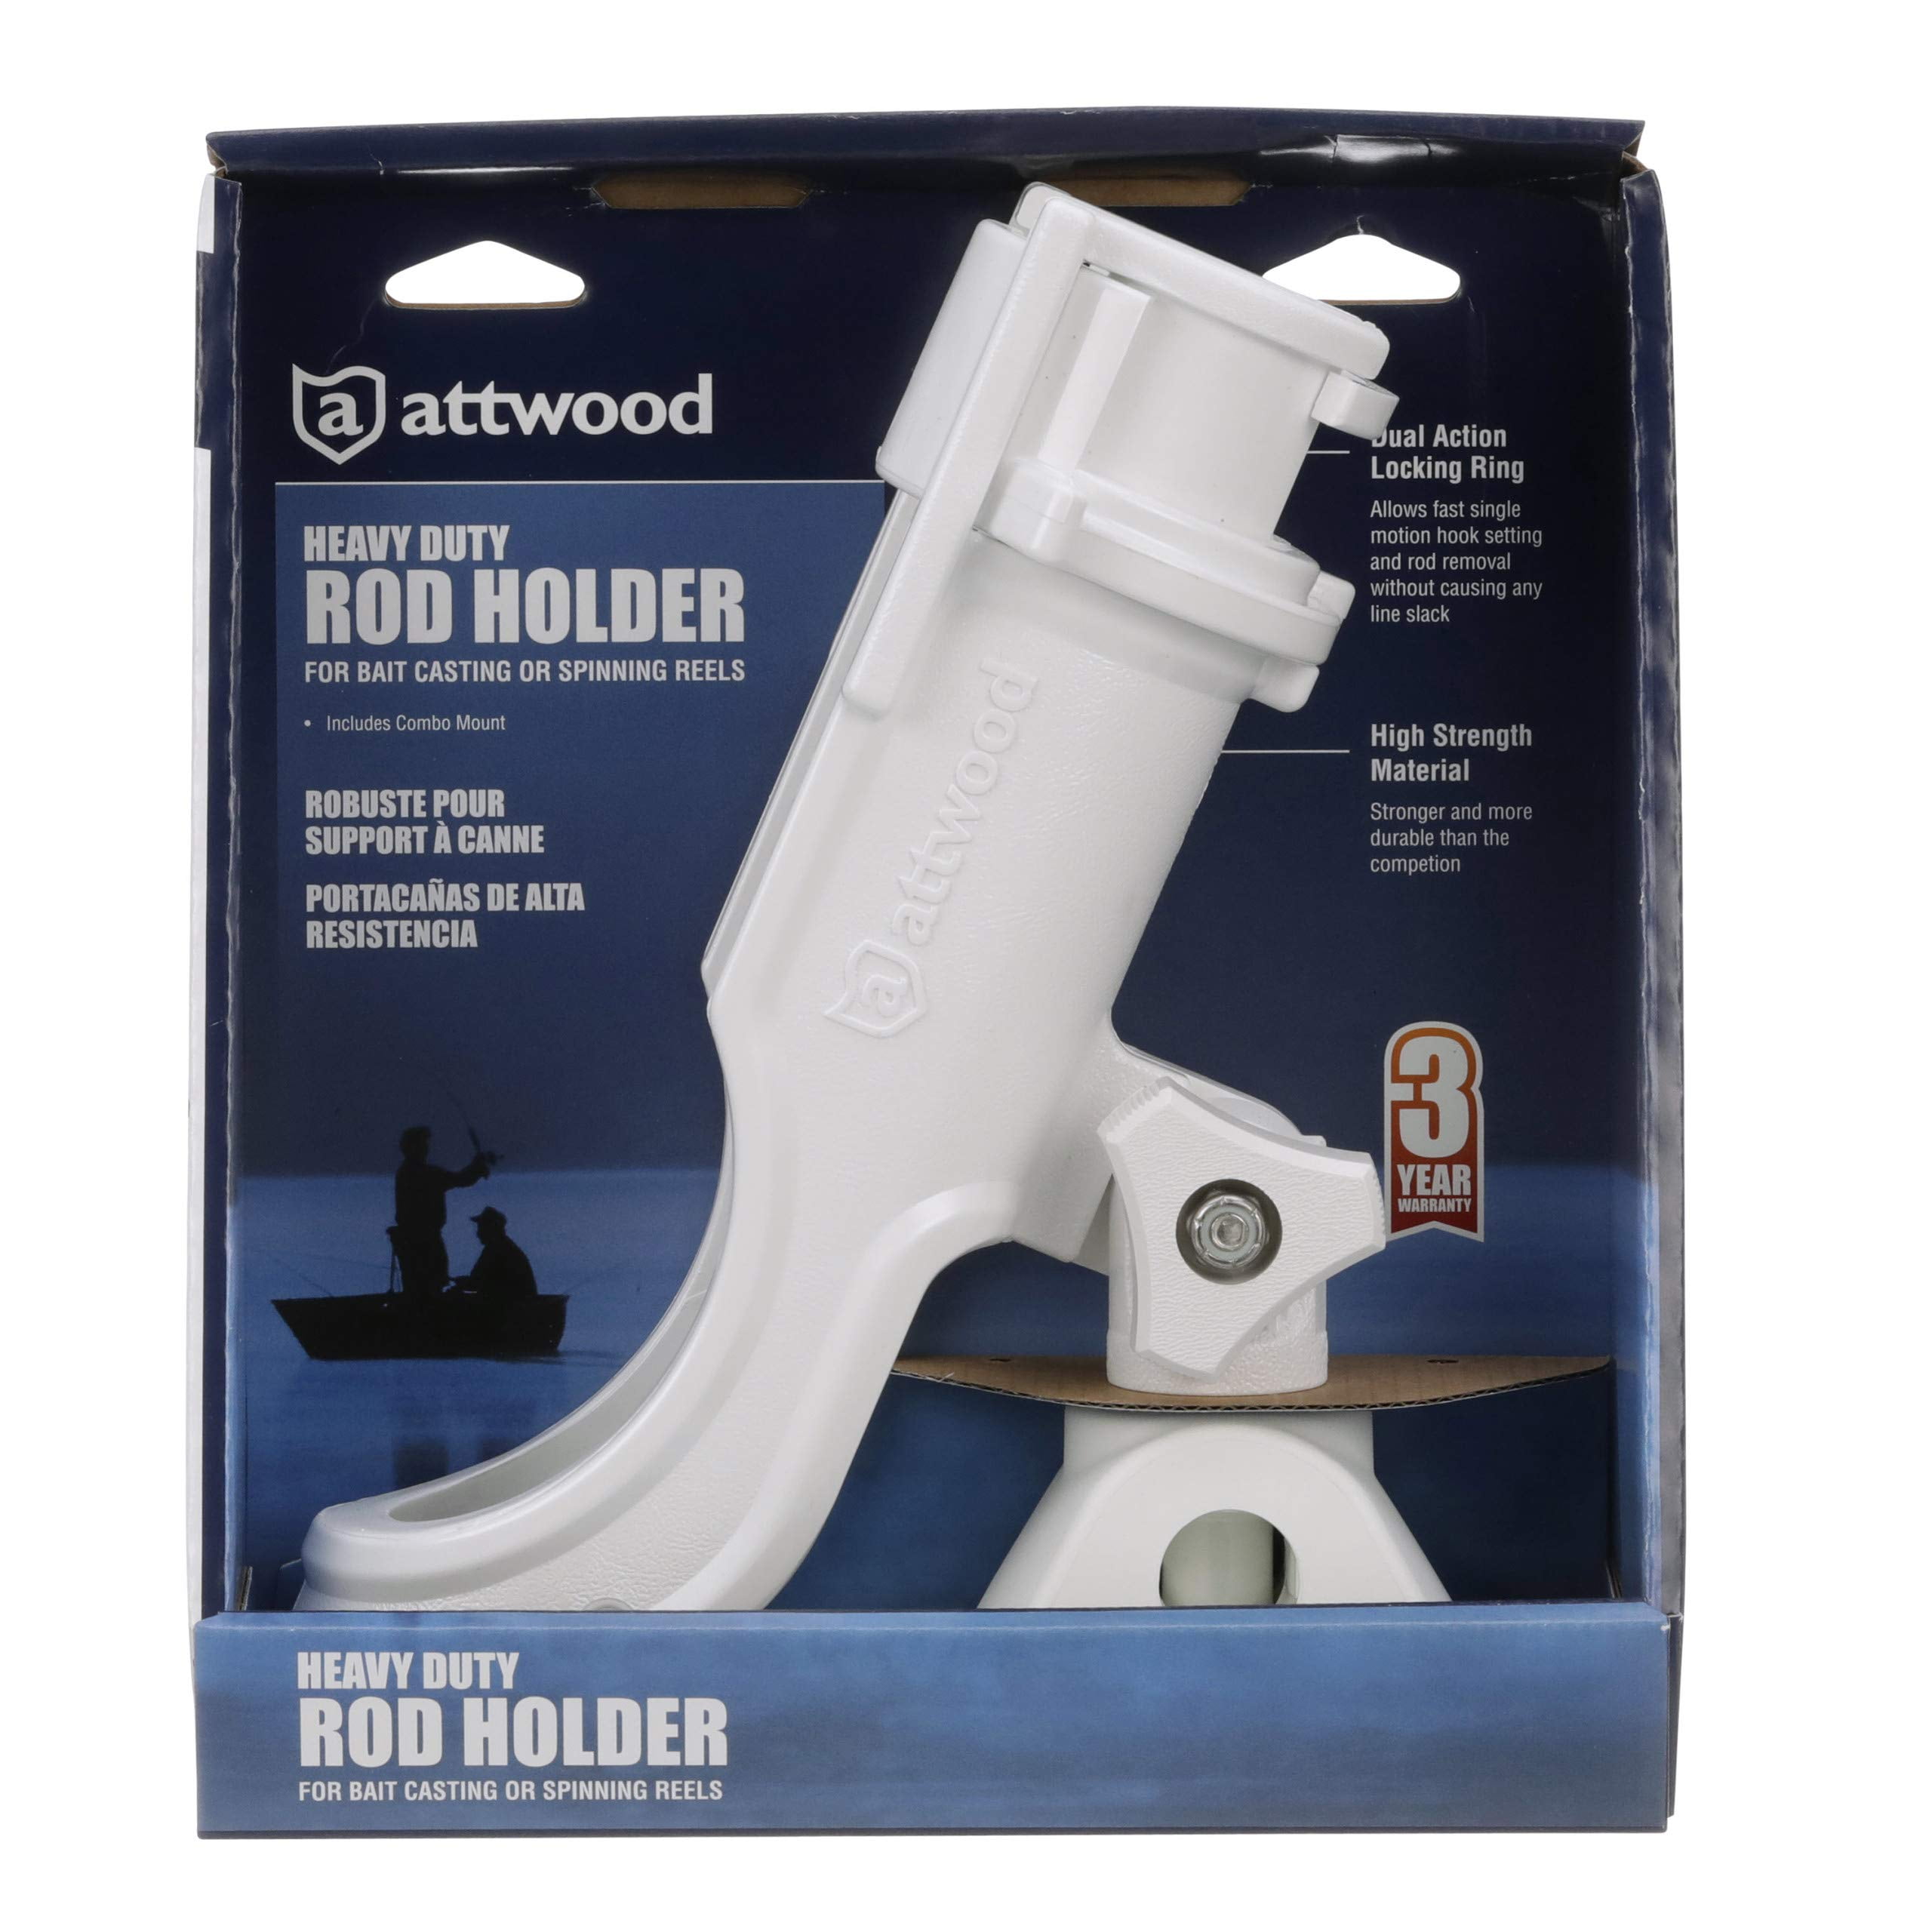 Attwood Adjustable Rod Holder with Combo Mount 